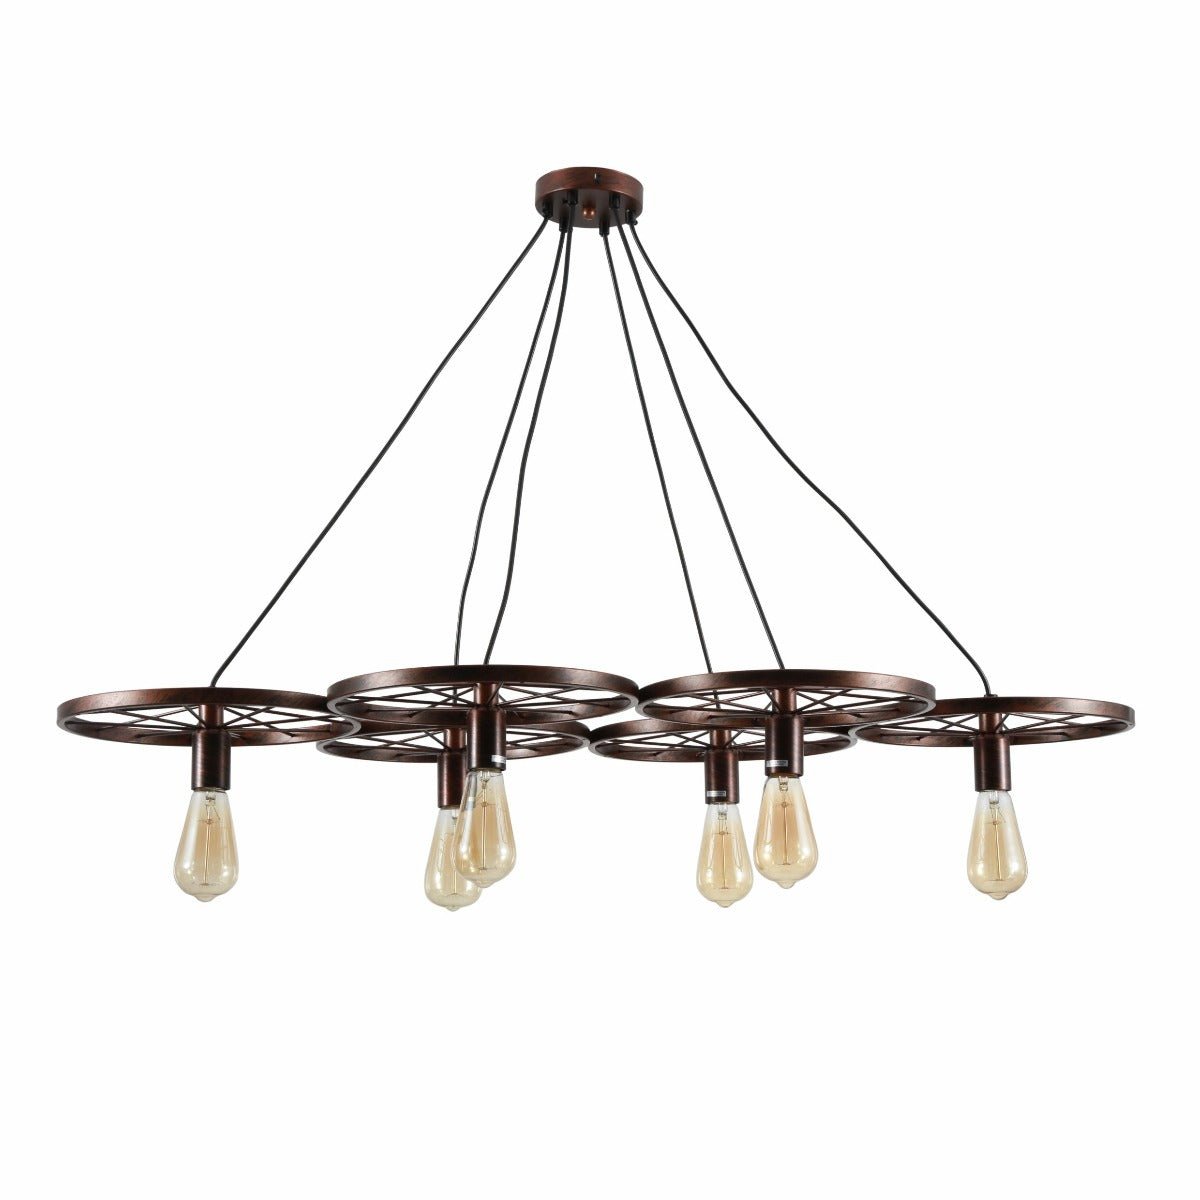 Main image of Vintage Industrial Wagon Wheel Pendant Light with 6xE27 Fitting | TEKLED 158-17896